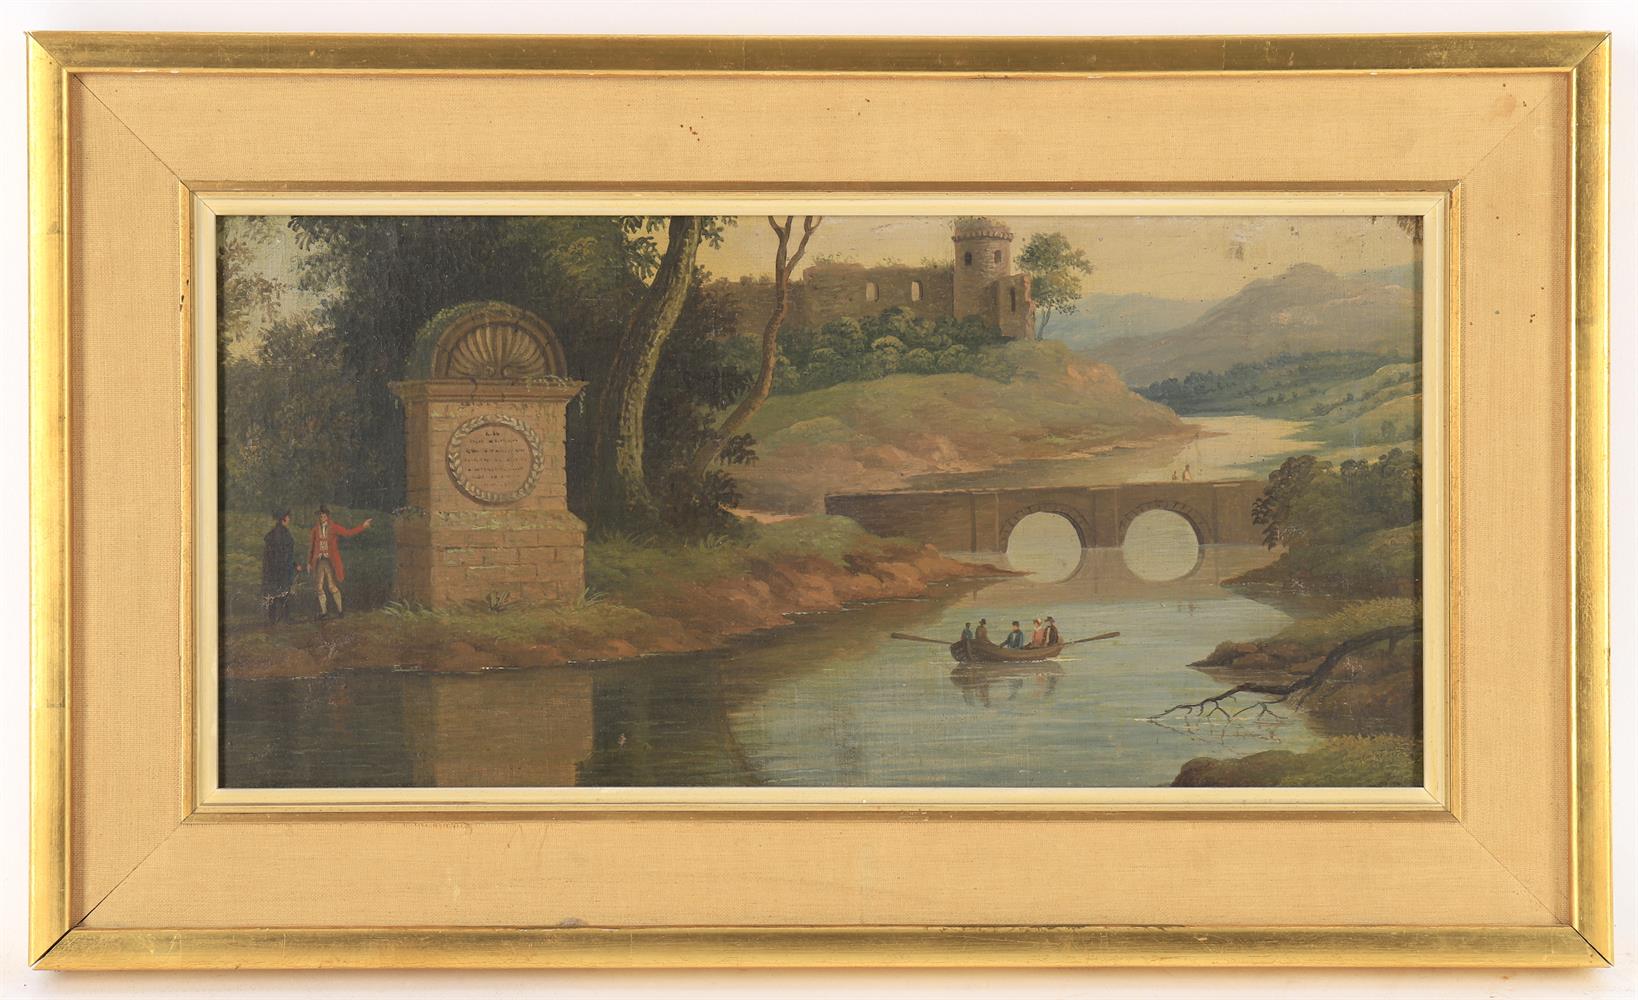 British School (19th century), Figures in a rowing boat